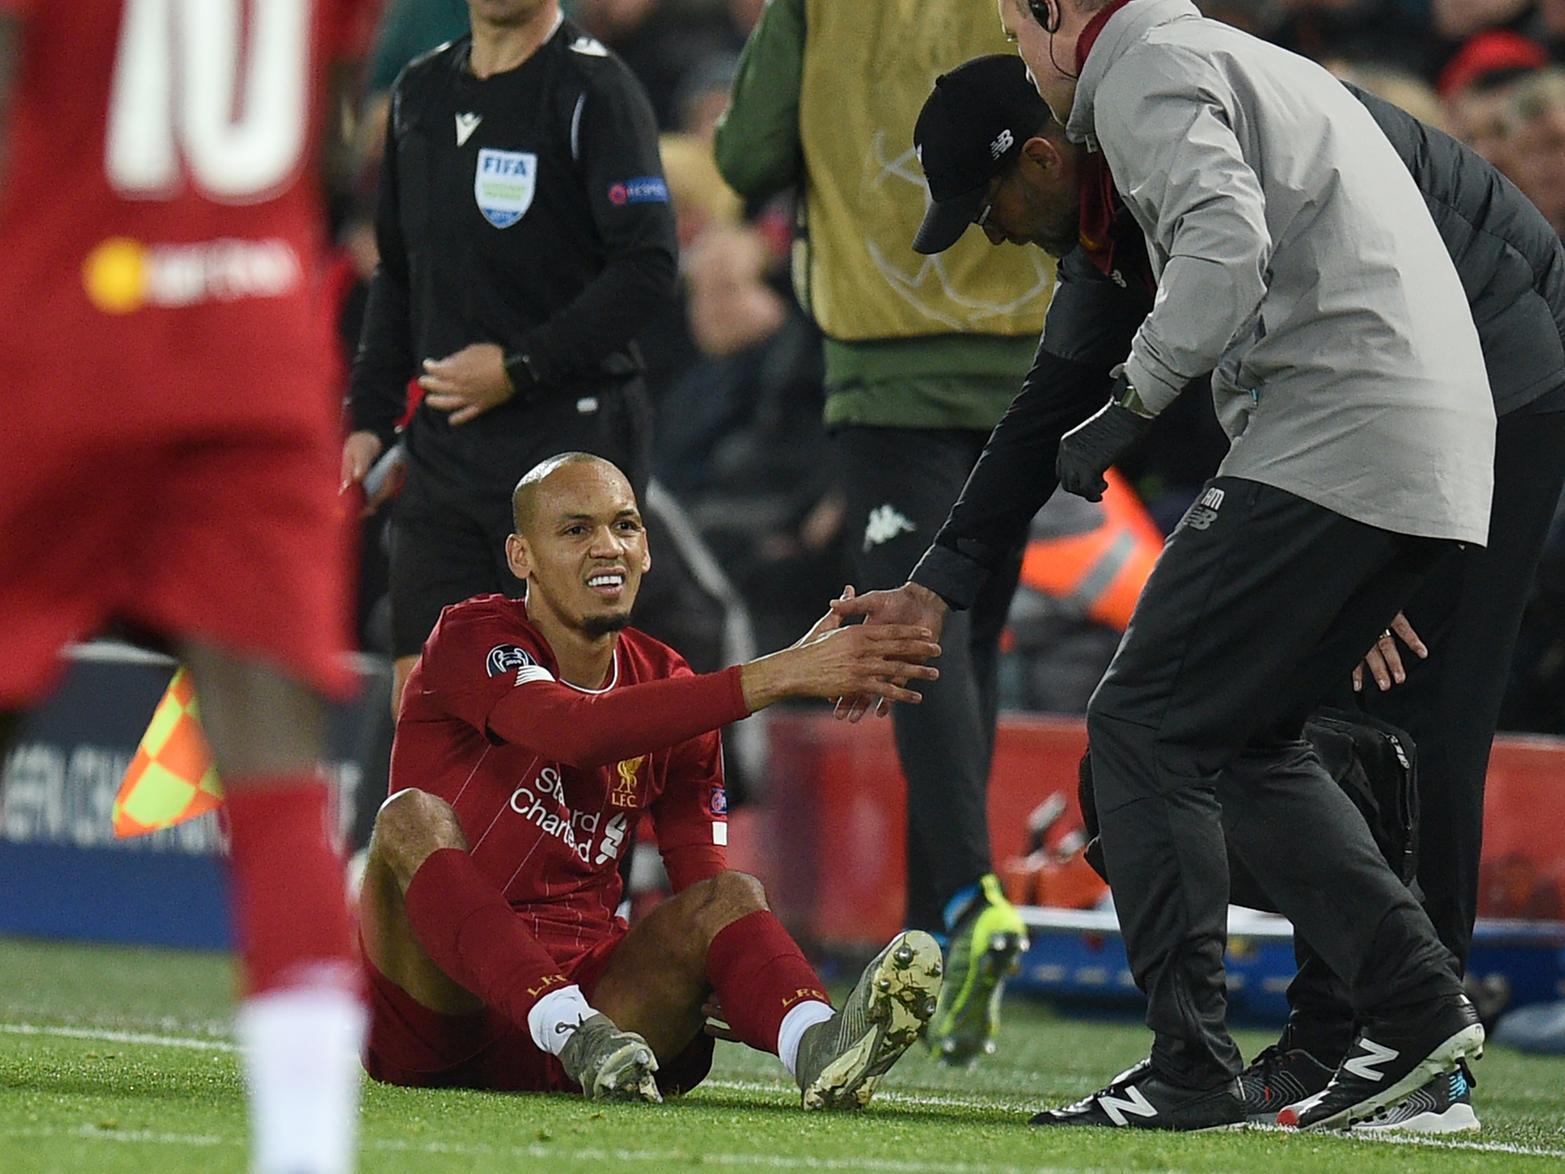 Liverpools defensive midfielder Fabinho will be out until January with a knee injury - a key weakness Brighton will look to exploit this weekend.